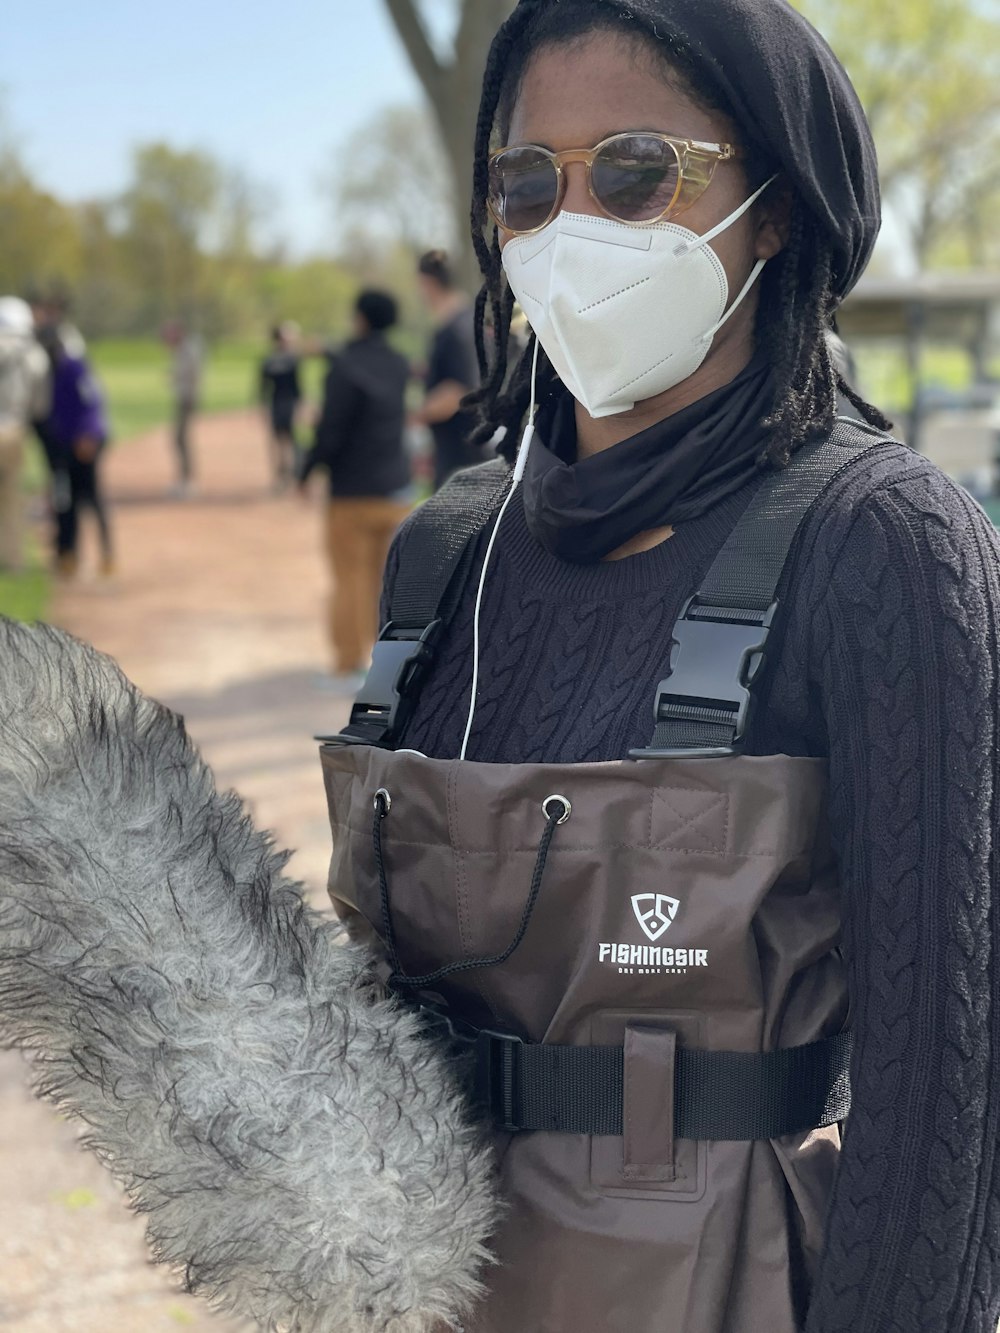 a person wearing a face mask and carrying a bag